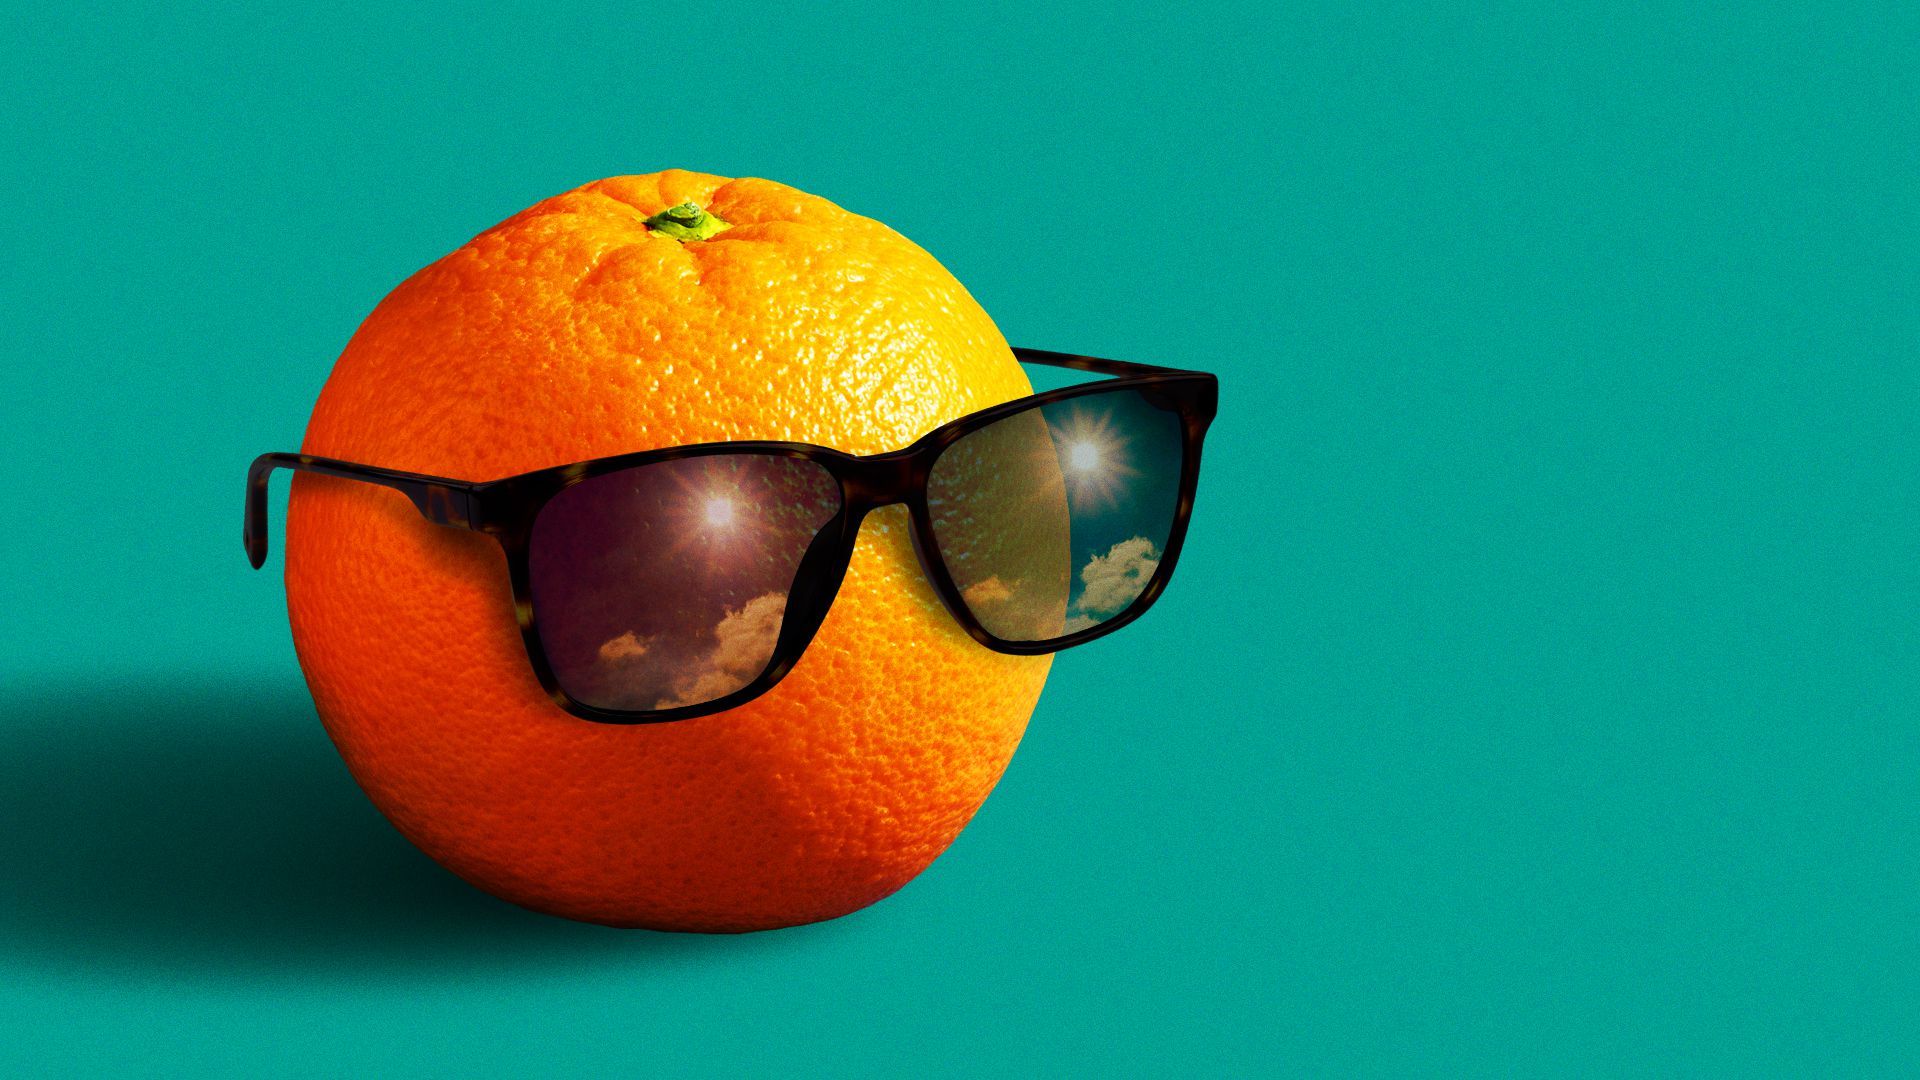 Illustration of an orange with sunglasses on a teal background.